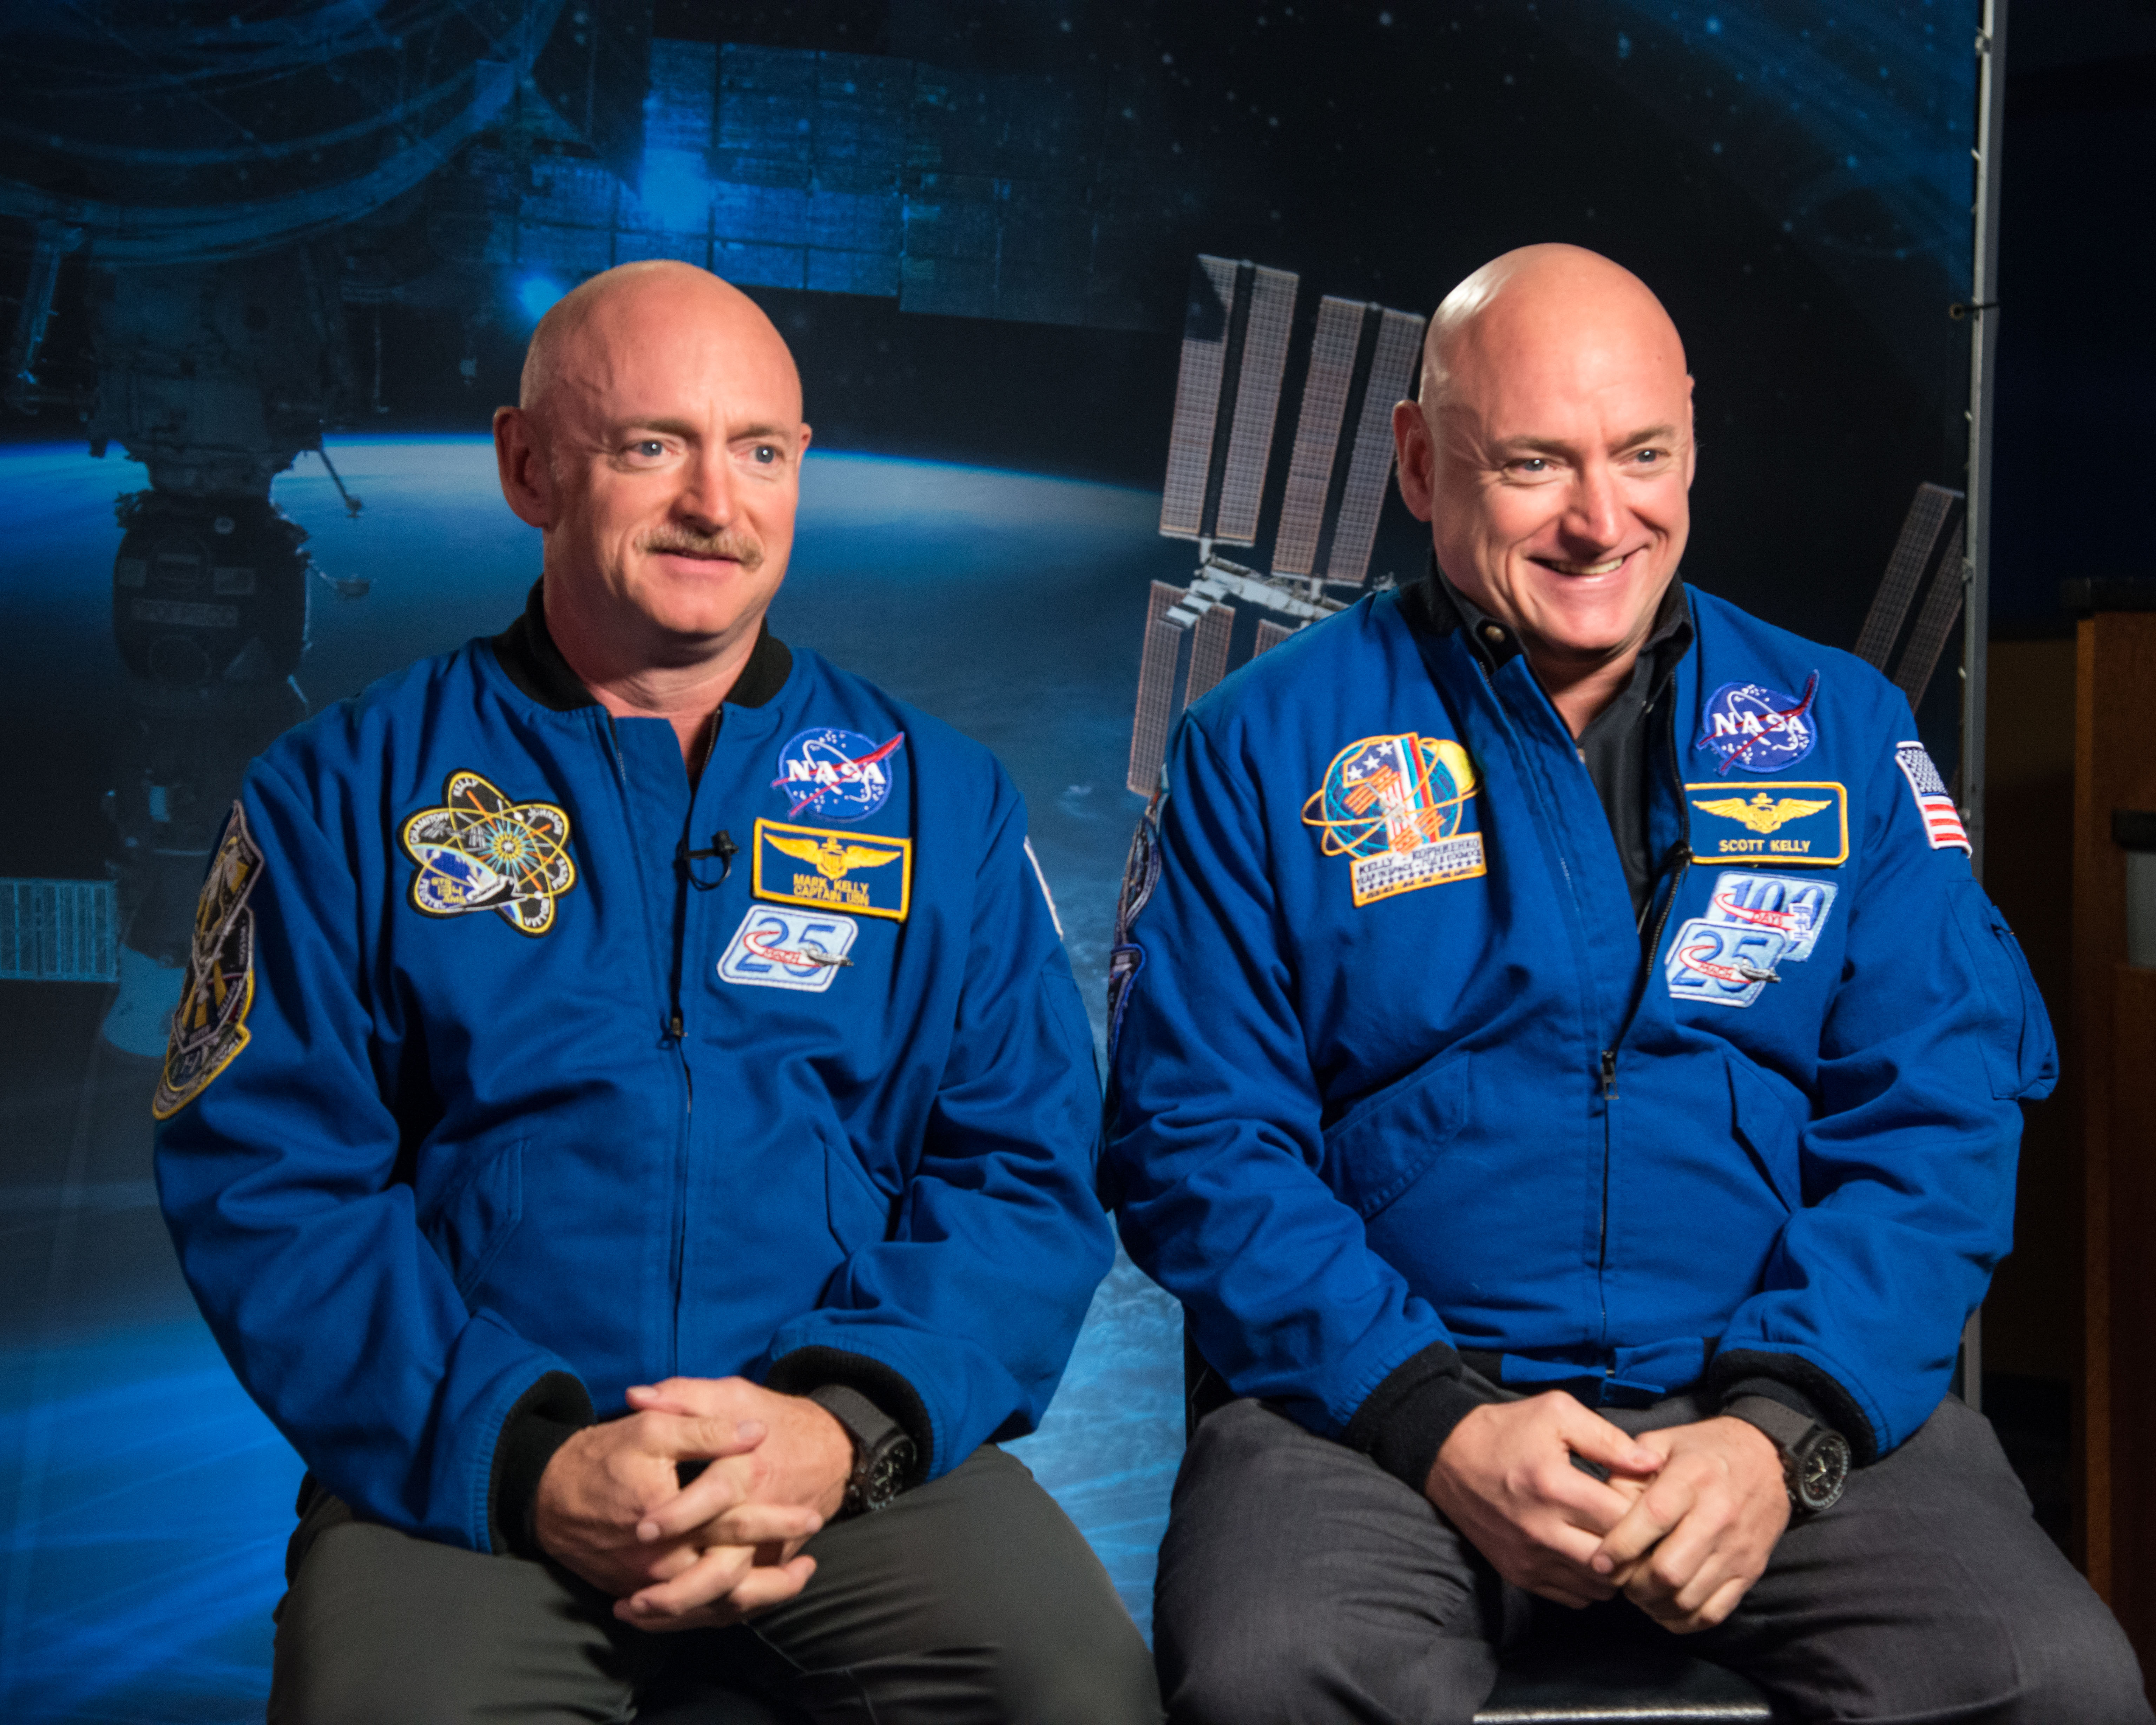 Two bald men in NASA gear. The one on the left has a mustache. 